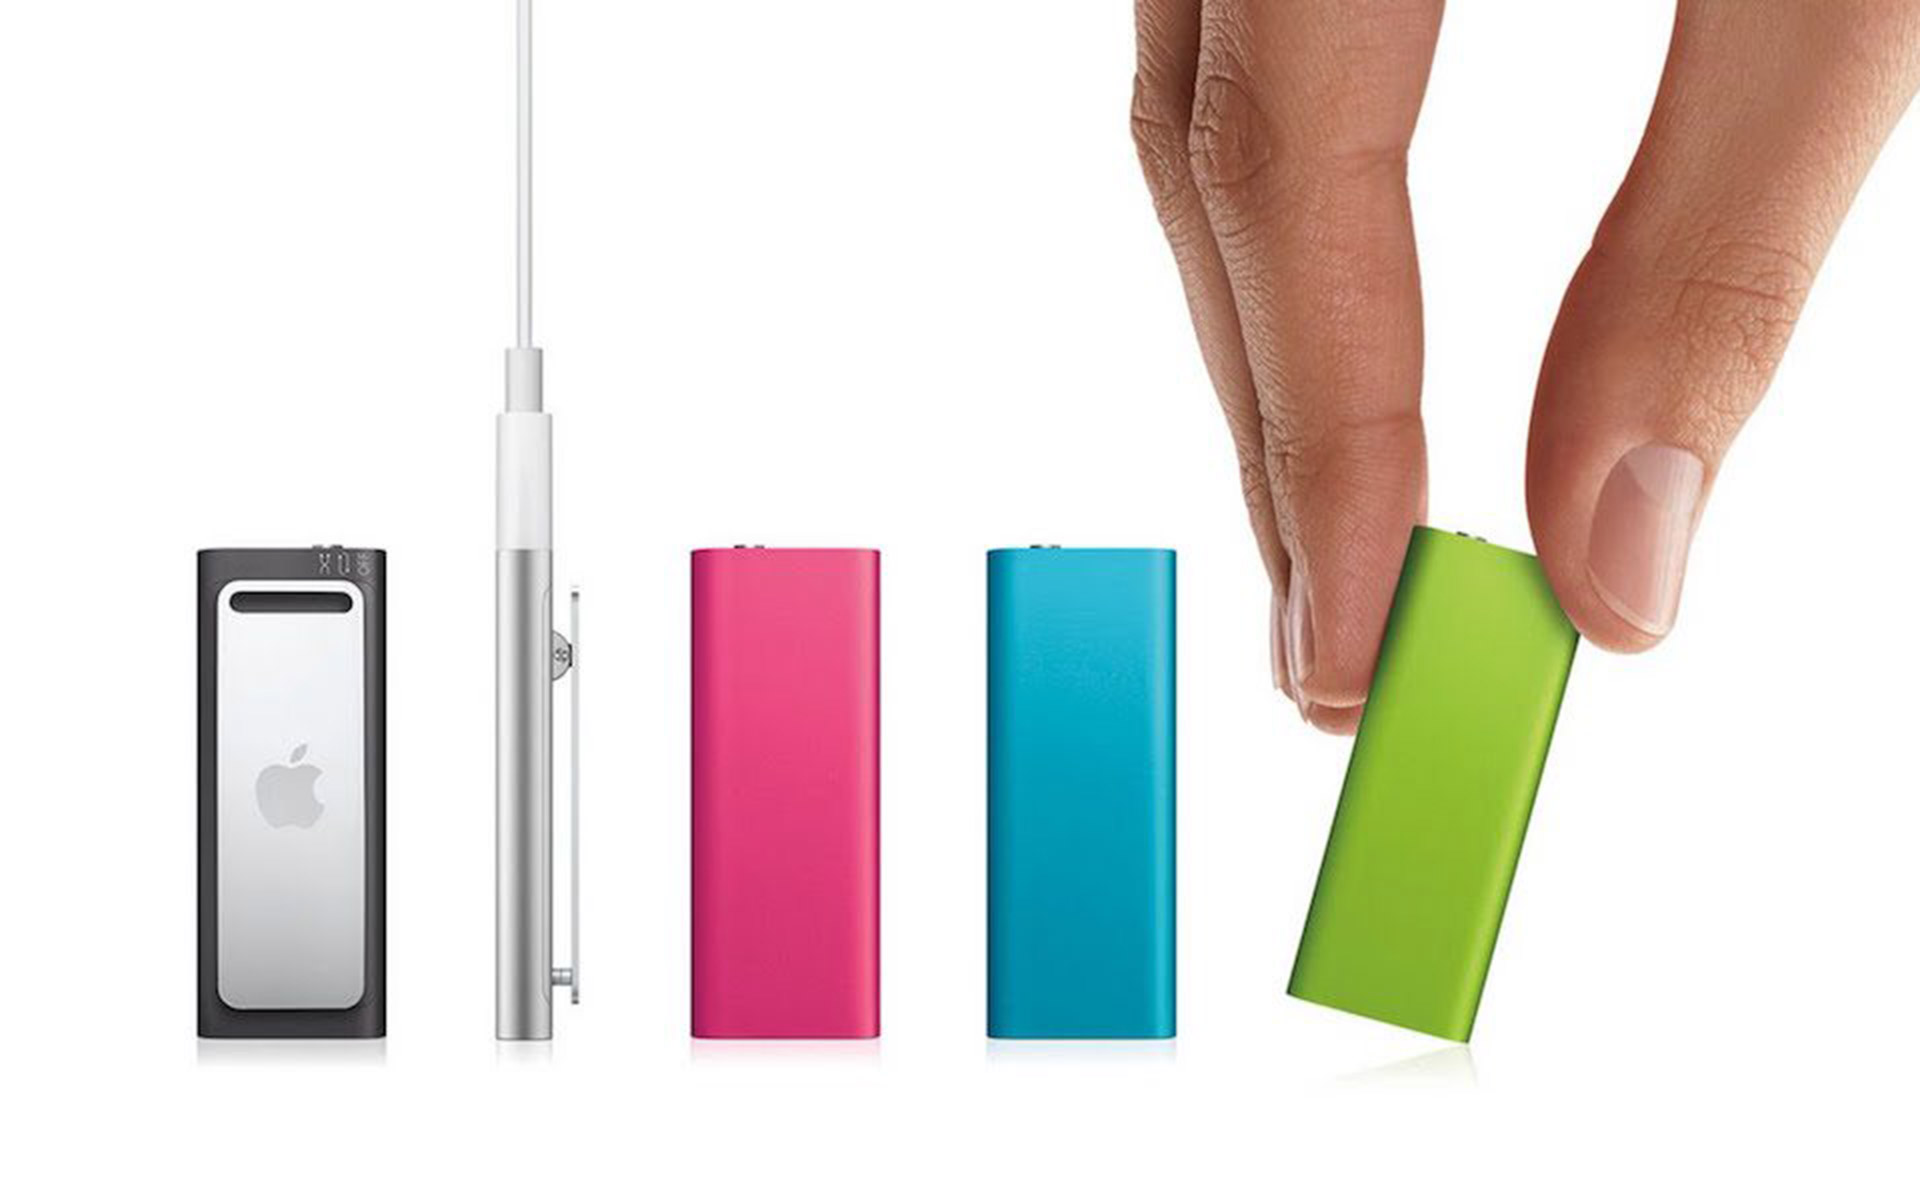 Third generation iPod in different colors